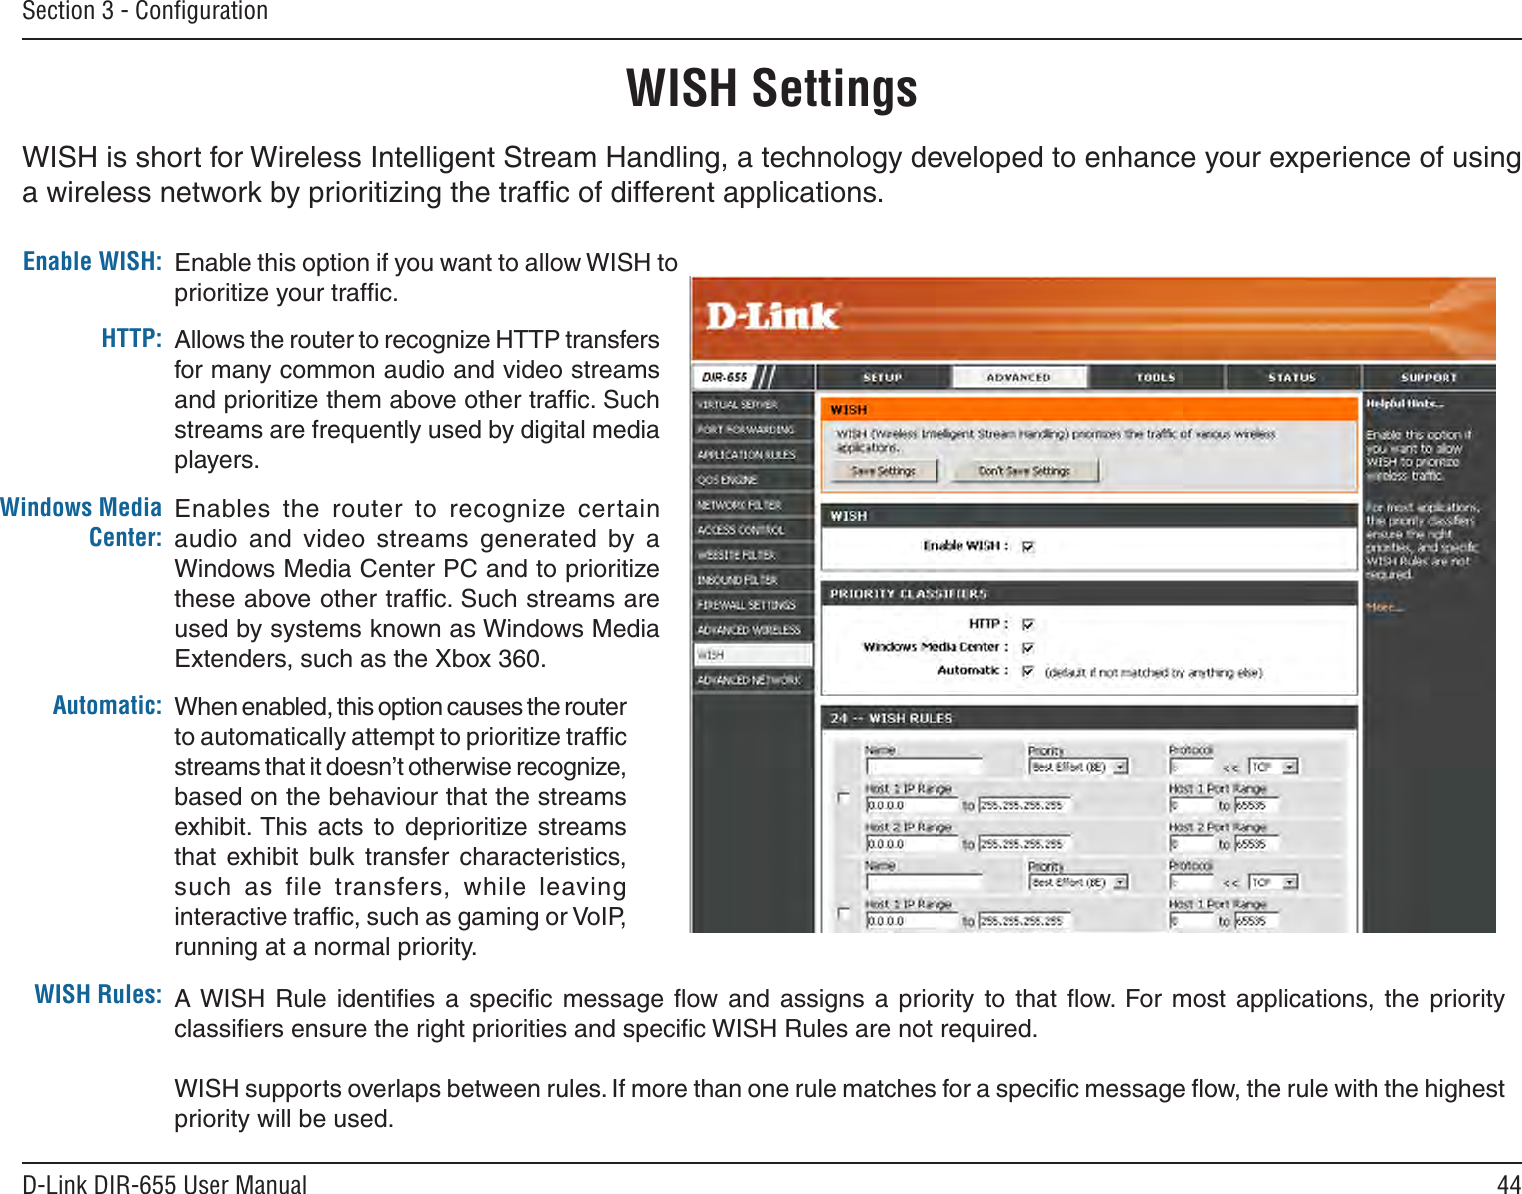 44D-Link DIR-655 User ManualSection 3 - ConﬁgurationWISH SettingsWISH is short for Wireless Intelligent Stream Handling, a technology developed to enhance your experience of using a wireless network by prioritizing the trafﬁc of different applications. Enable this option if you want to allow WISH to prioritize your trafﬁc. Enable WISH:Allows the router to recognize HTTP transfers for many common audio and video streams and prioritize them above other trafﬁc. Such streams are frequently used by digital media players. HTTP:Enables the  router  to  recognize  certain audio  and  video  streams  generated  by  a Windows Media Center PC and to prioritize these above other trafﬁc. Such streams are used by systems known as Windows Media Extenders, such as the Xbox 360. Windows Media Center:When enabled, this option causes the router to automatically attempt to prioritize trafﬁc streams that it doesn’t otherwise recognize, based on the behaviour that the streams exhibit. This acts  to  deprioritize  streams that  exhibit  bulk  transfer  characteristics, such  as  file  transfers,  while  leaving interactive trafﬁc, such as gaming or VoIP, running at a normal priority. Automatic:WISH Rules: A WISH  Rule  identiﬁes  a  speciﬁc  message ﬂow  and assigns  a  priority  to  that ﬂow.  For most  applications, the  priority classiﬁers ensure the right priorities and speciﬁc WISH Rules are not required. WISH supports overlaps between rules. If more than one rule matches for a speciﬁc message ﬂow, the rule with the highest priority will be used. 